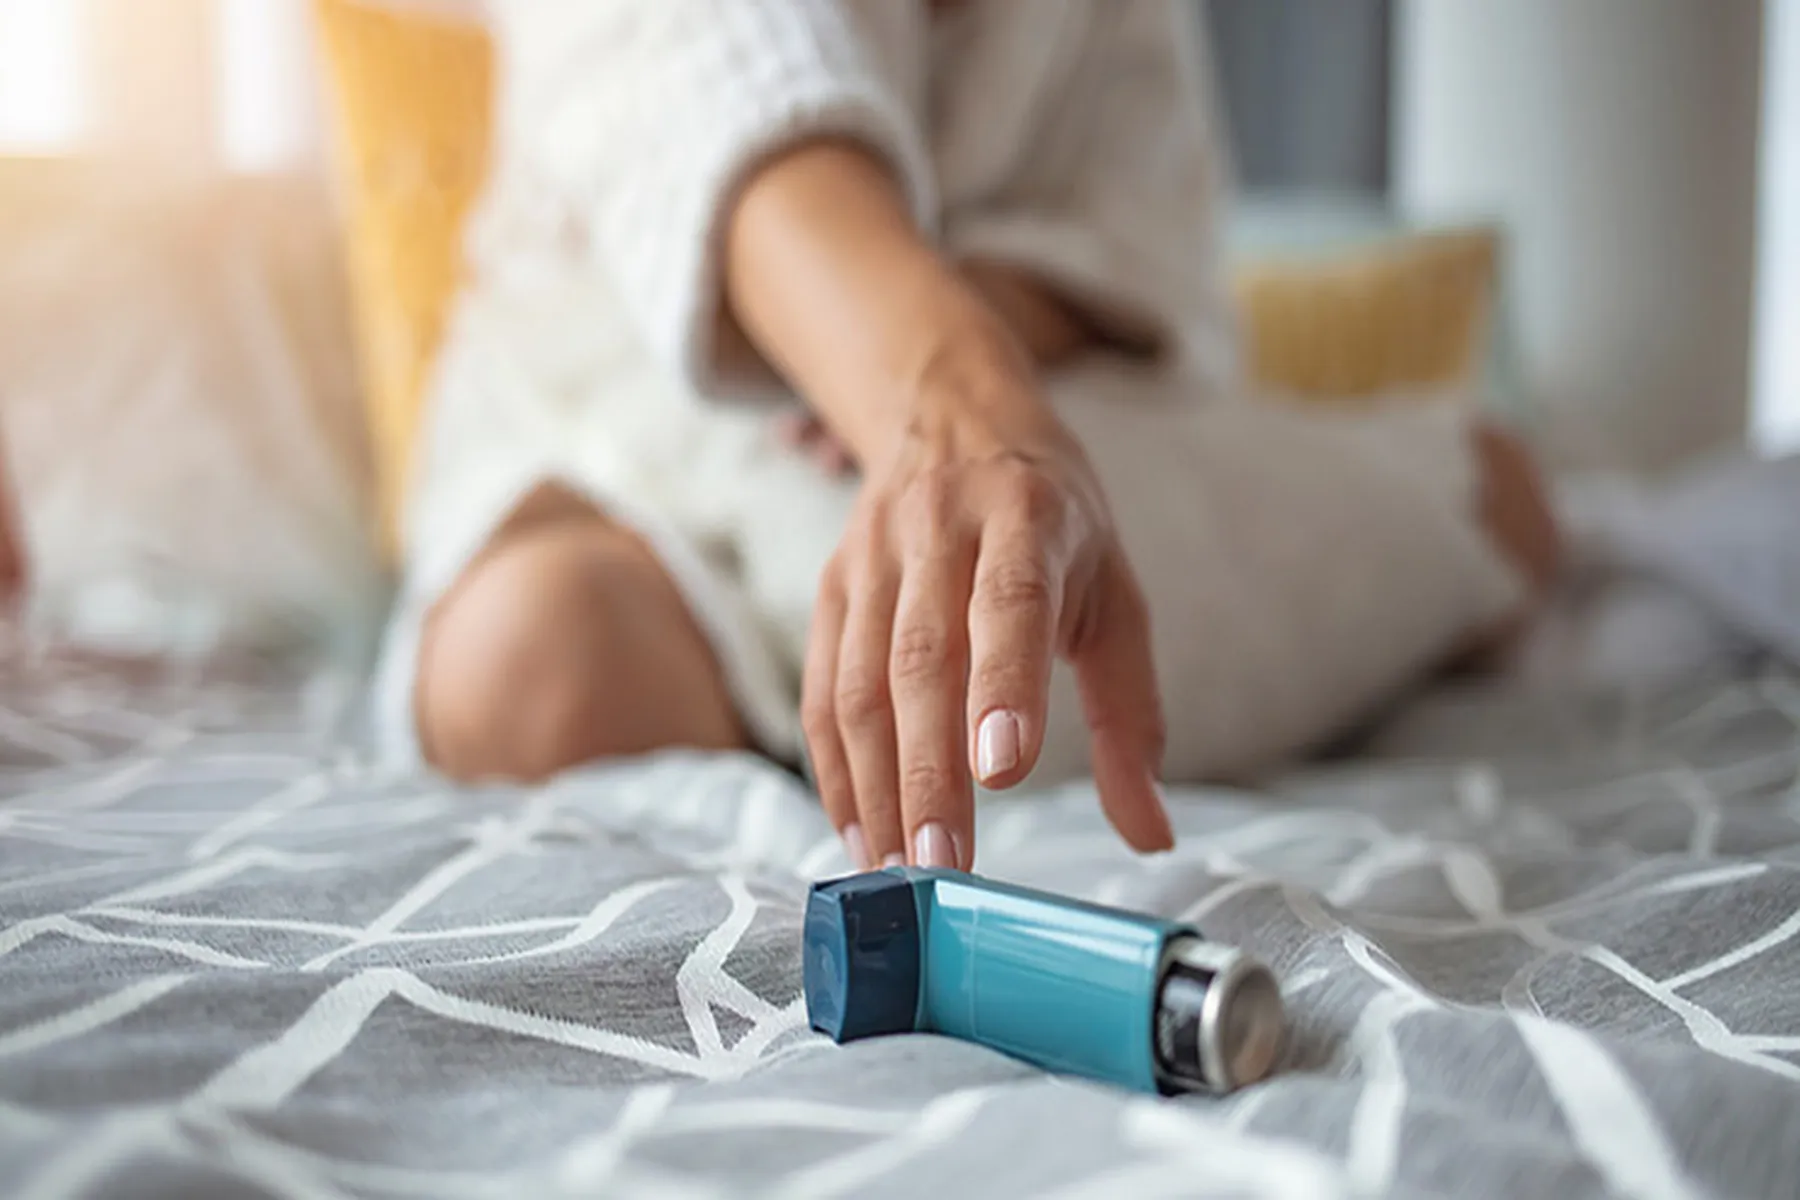 Woman sitting on bed reaches her hand out towards her blue inhaler